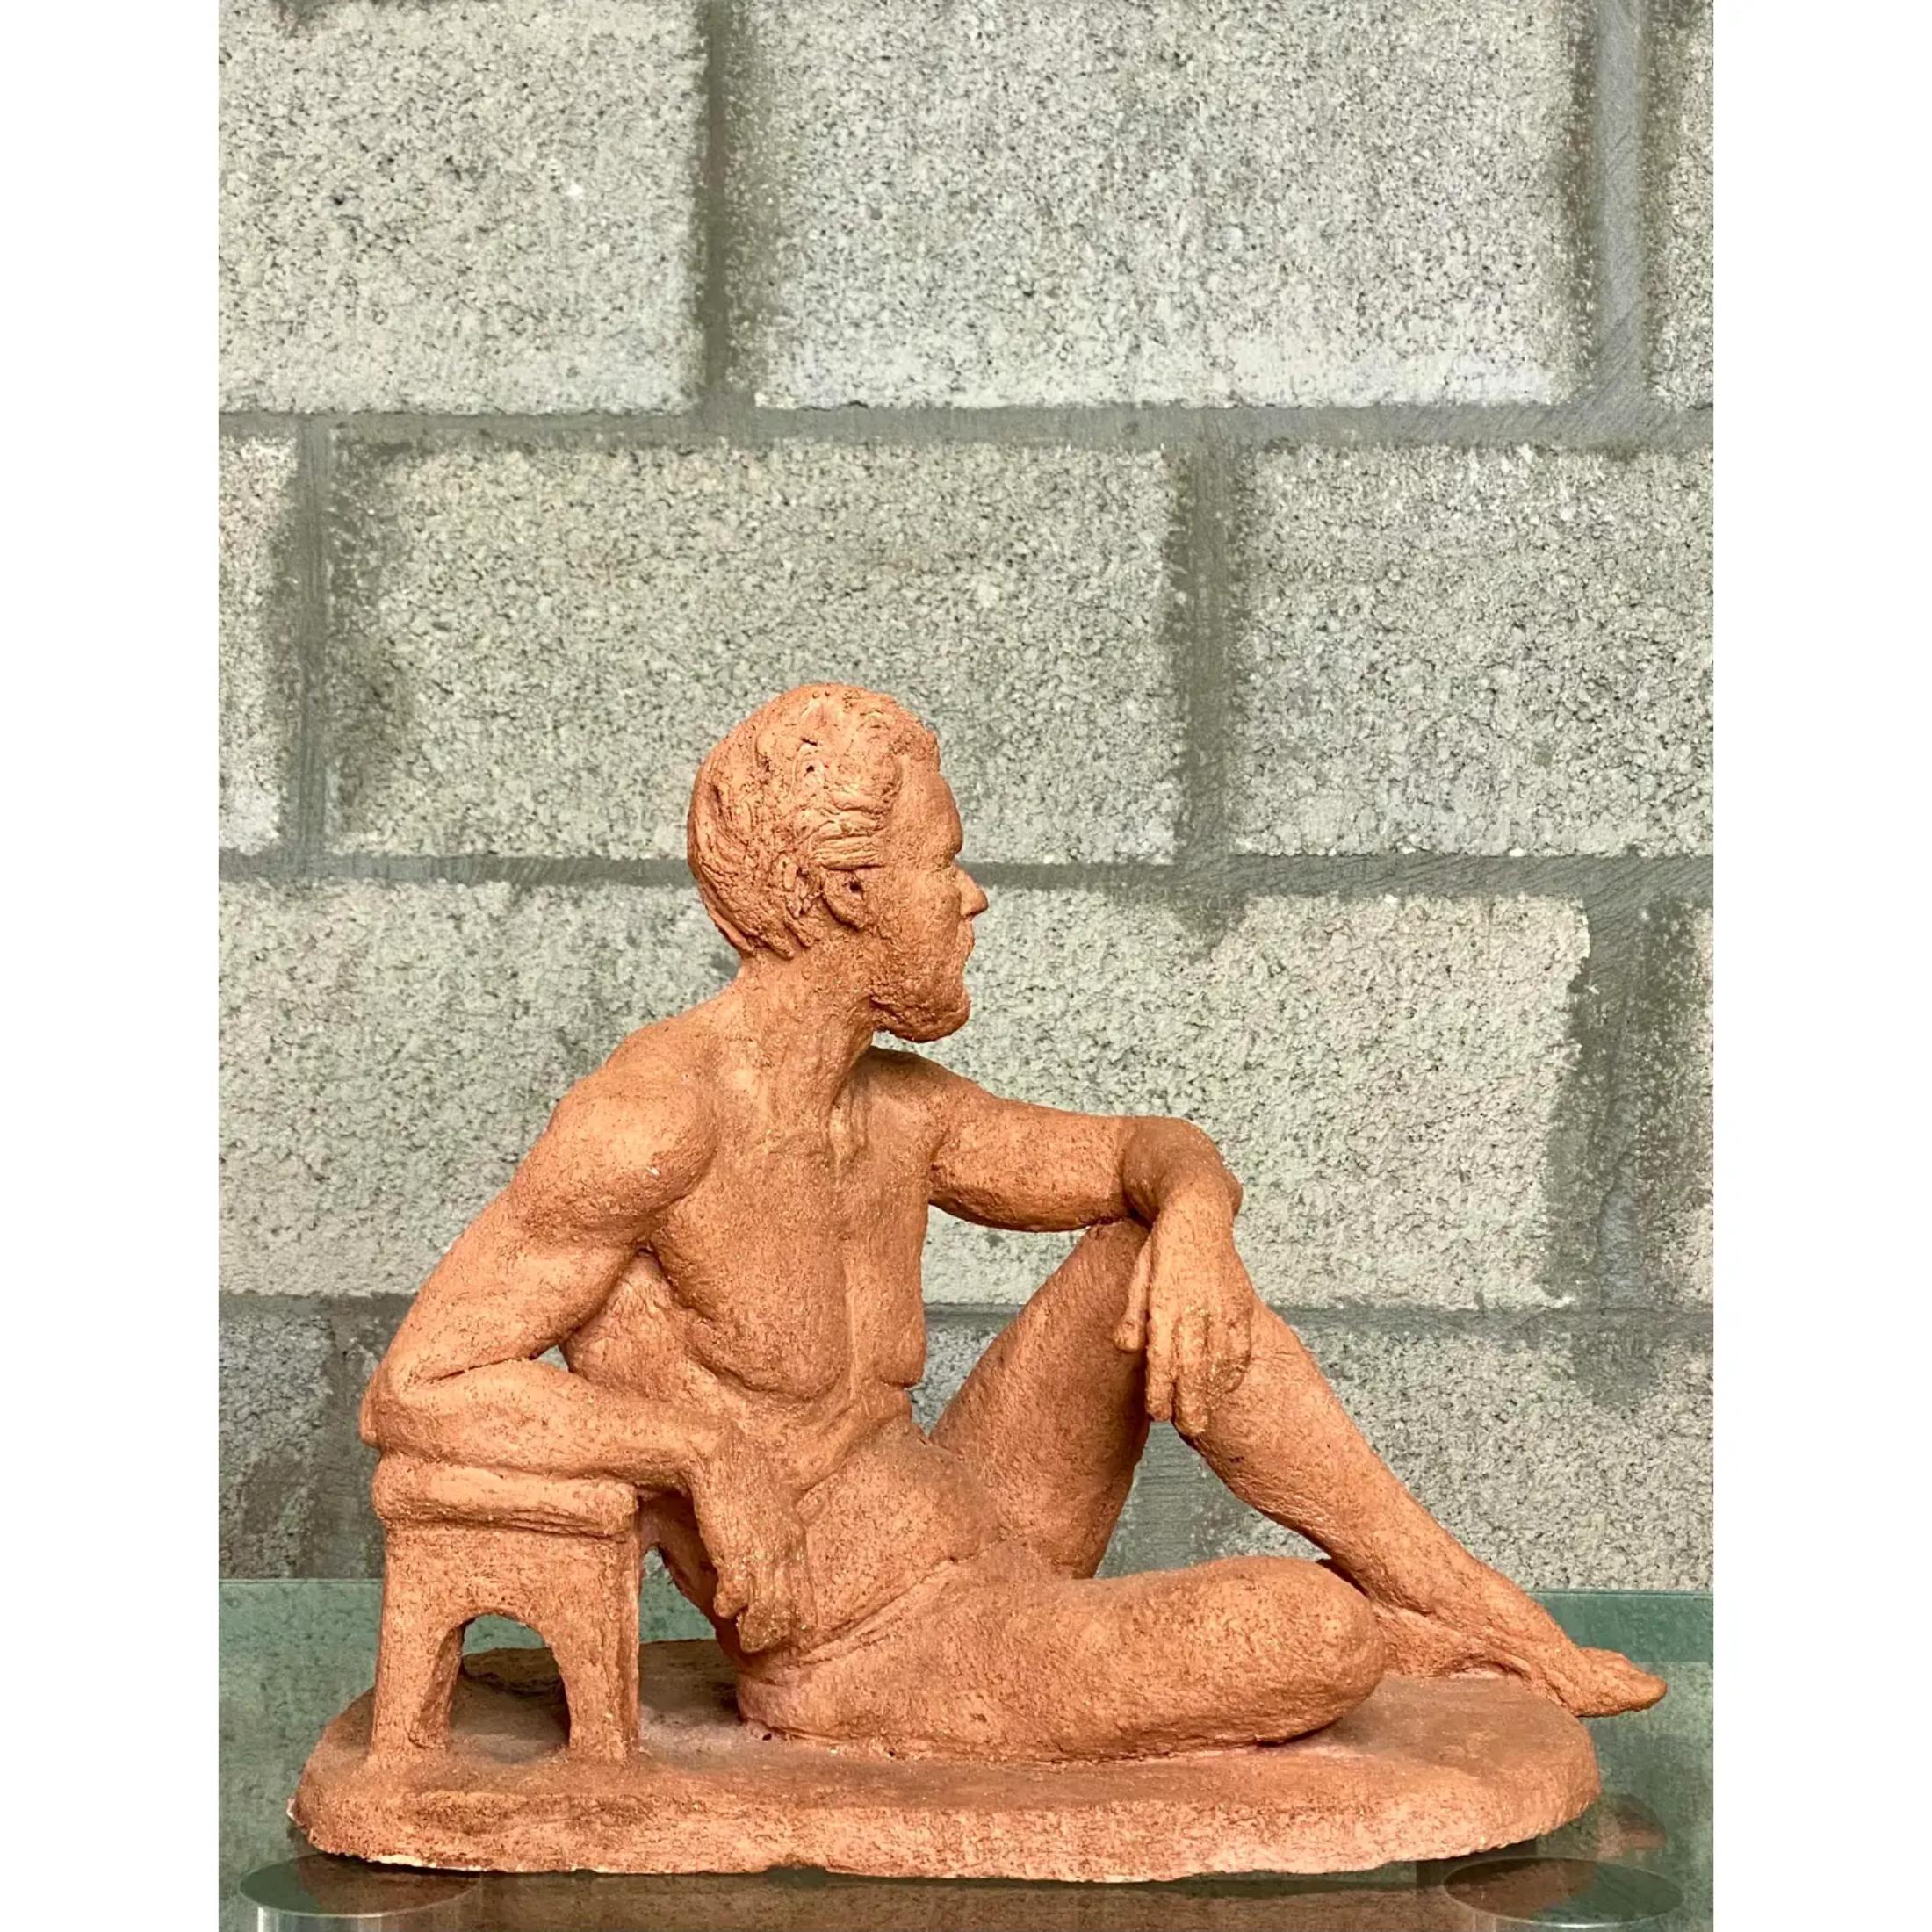 Fantastic vintage original signed sculpture. A groovy figure of a bearded man. Done in a terracotta painted plaster. Acquired from anPalm Beach estate